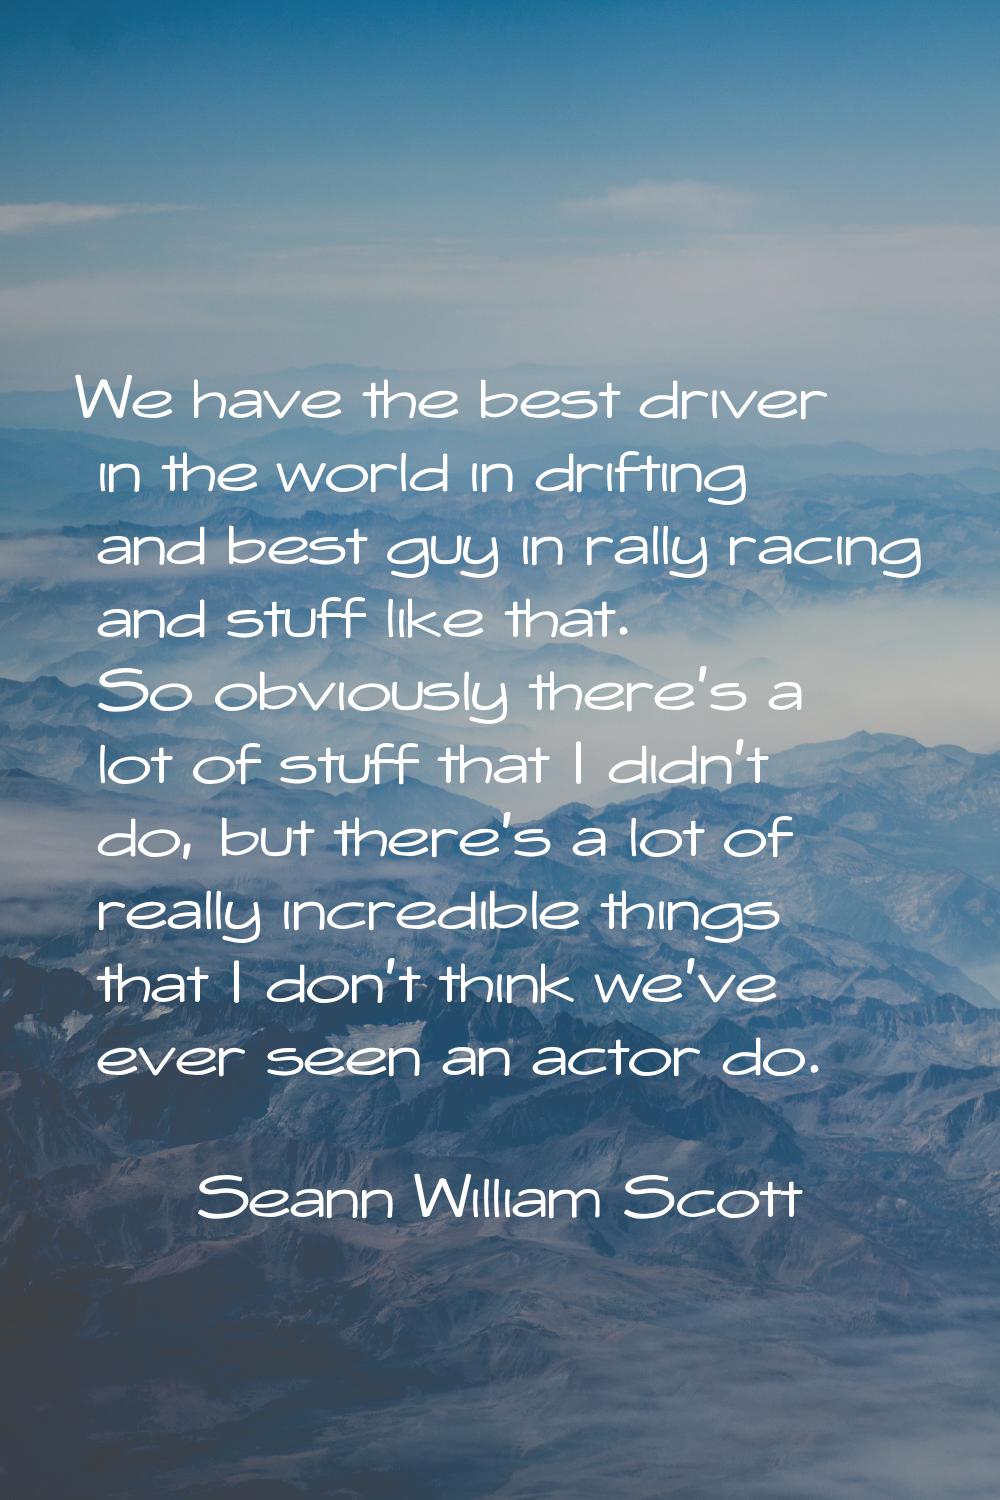 We have the best driver in the world in drifting and best guy in rally racing and stuff like that. 